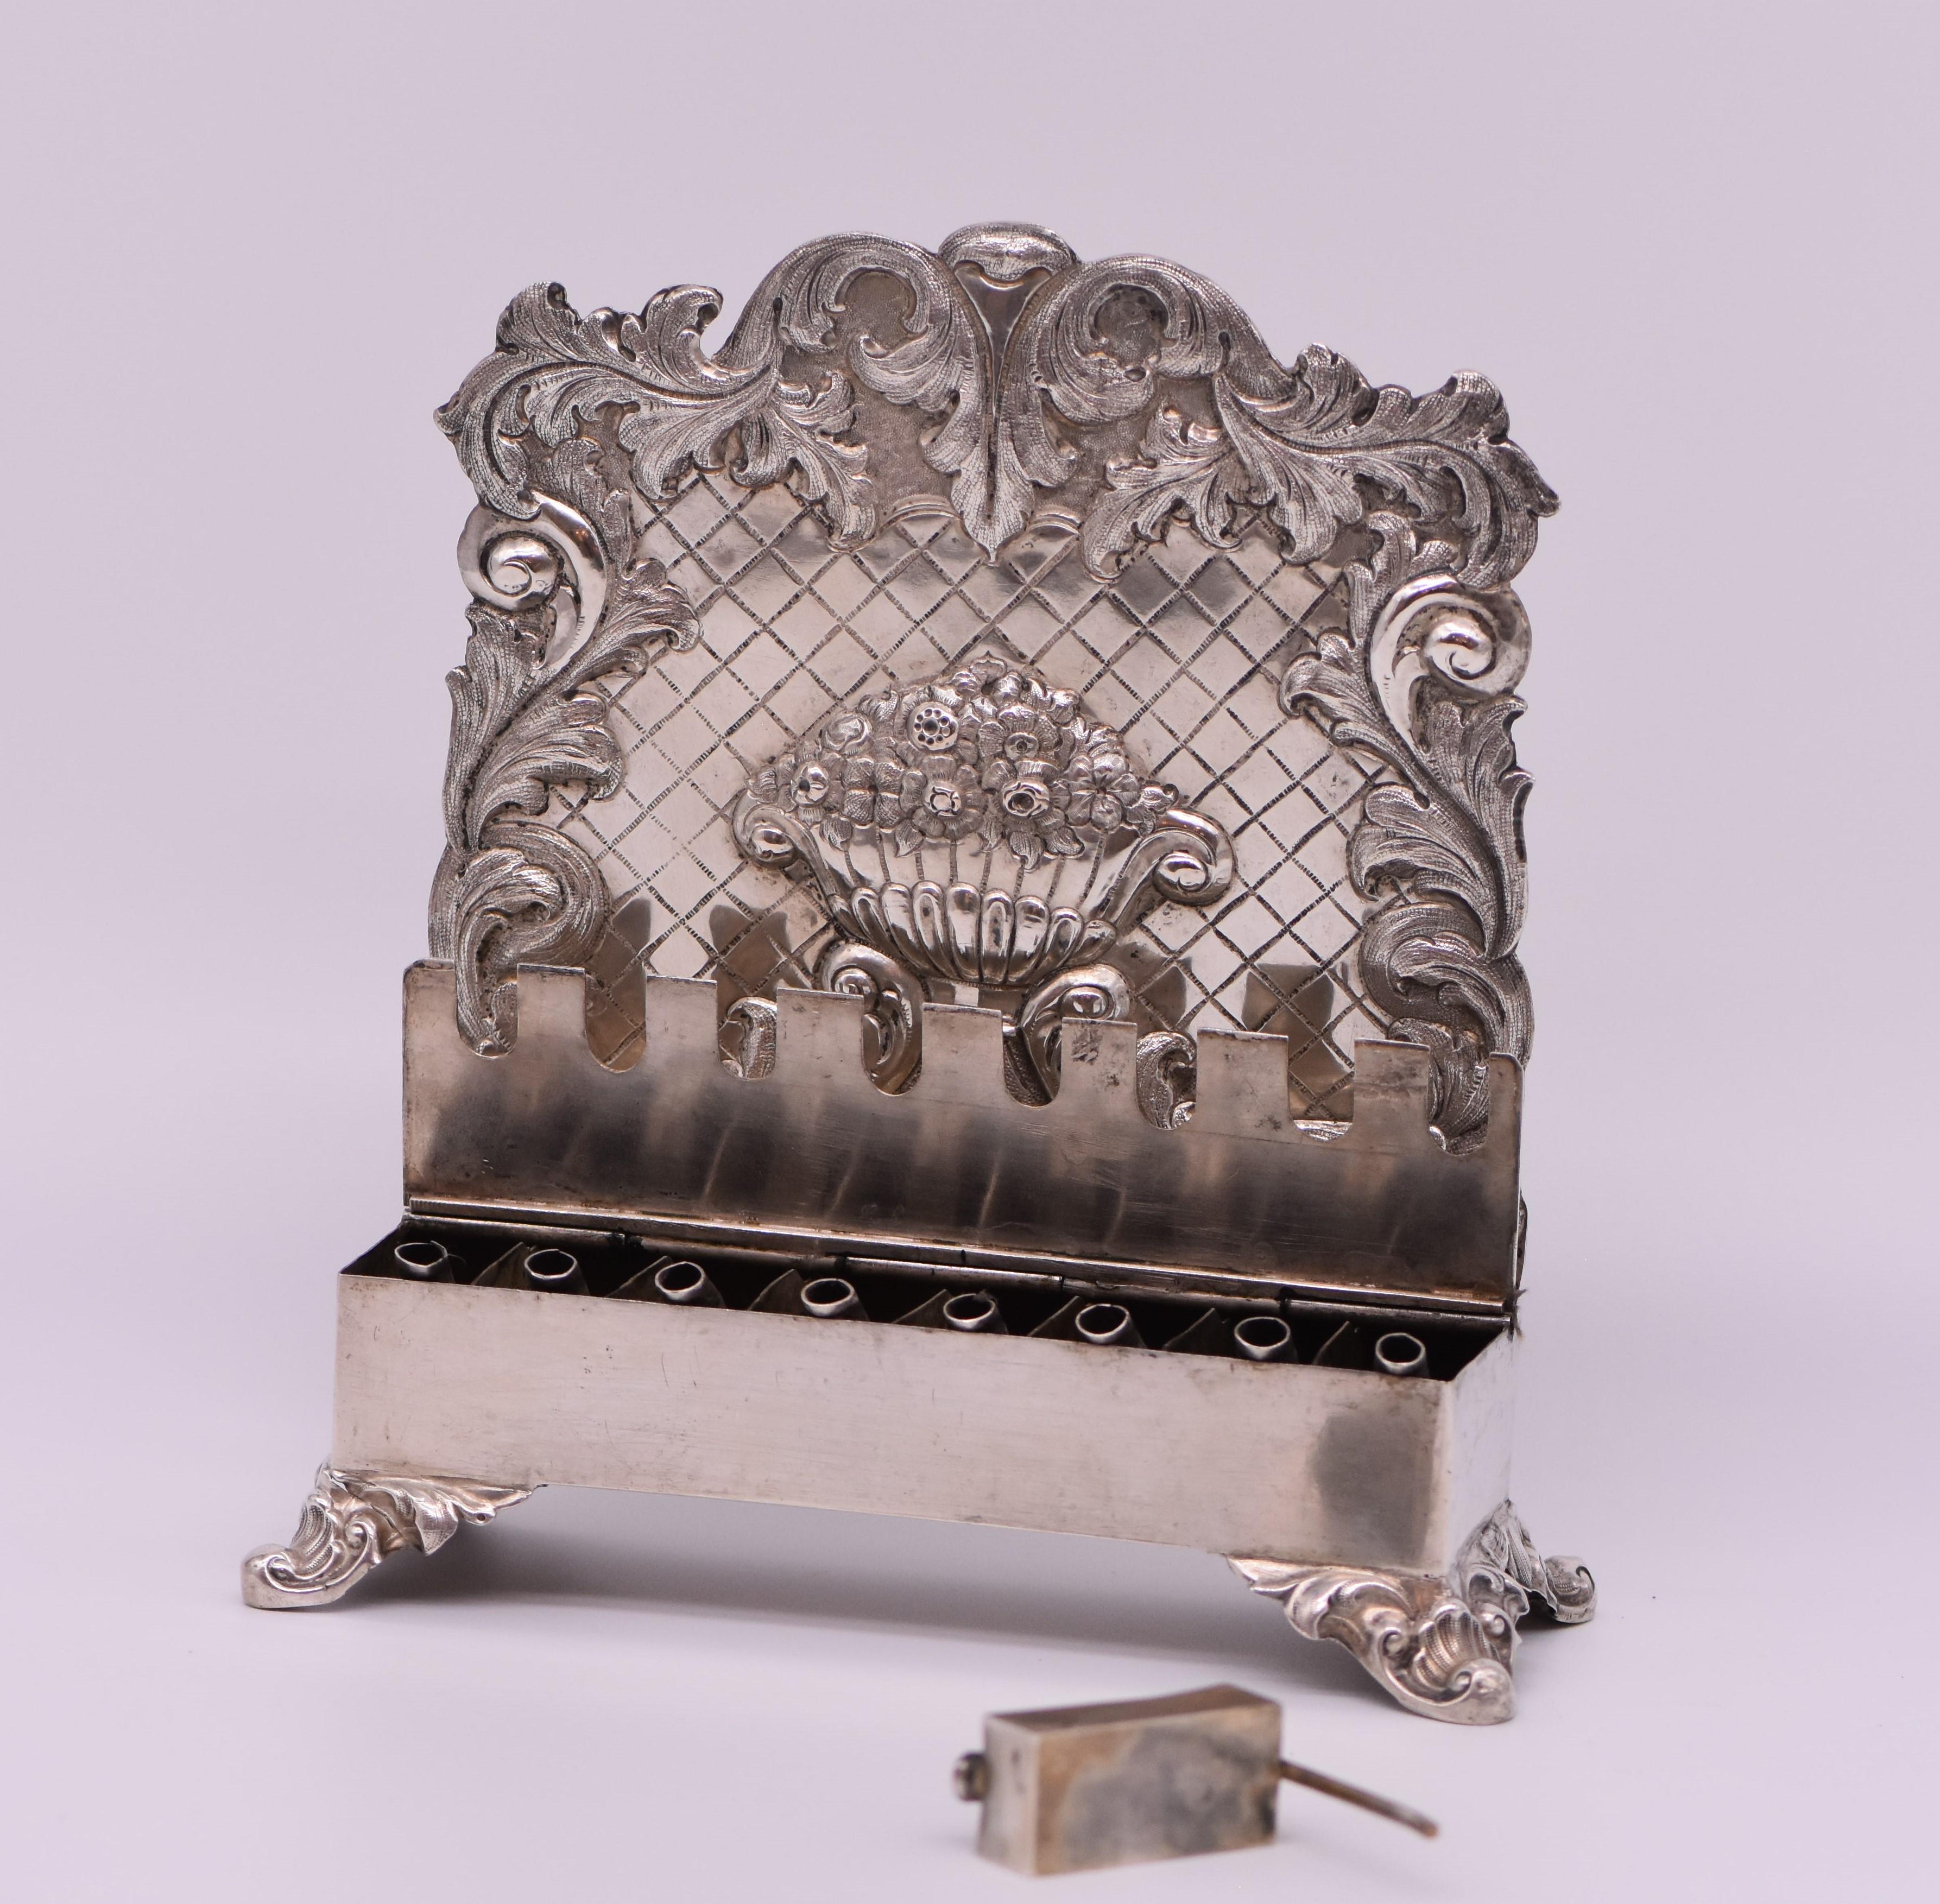 Hand-Crafted Mid-19th Century German Silver Hanukkah Lamp For Sale